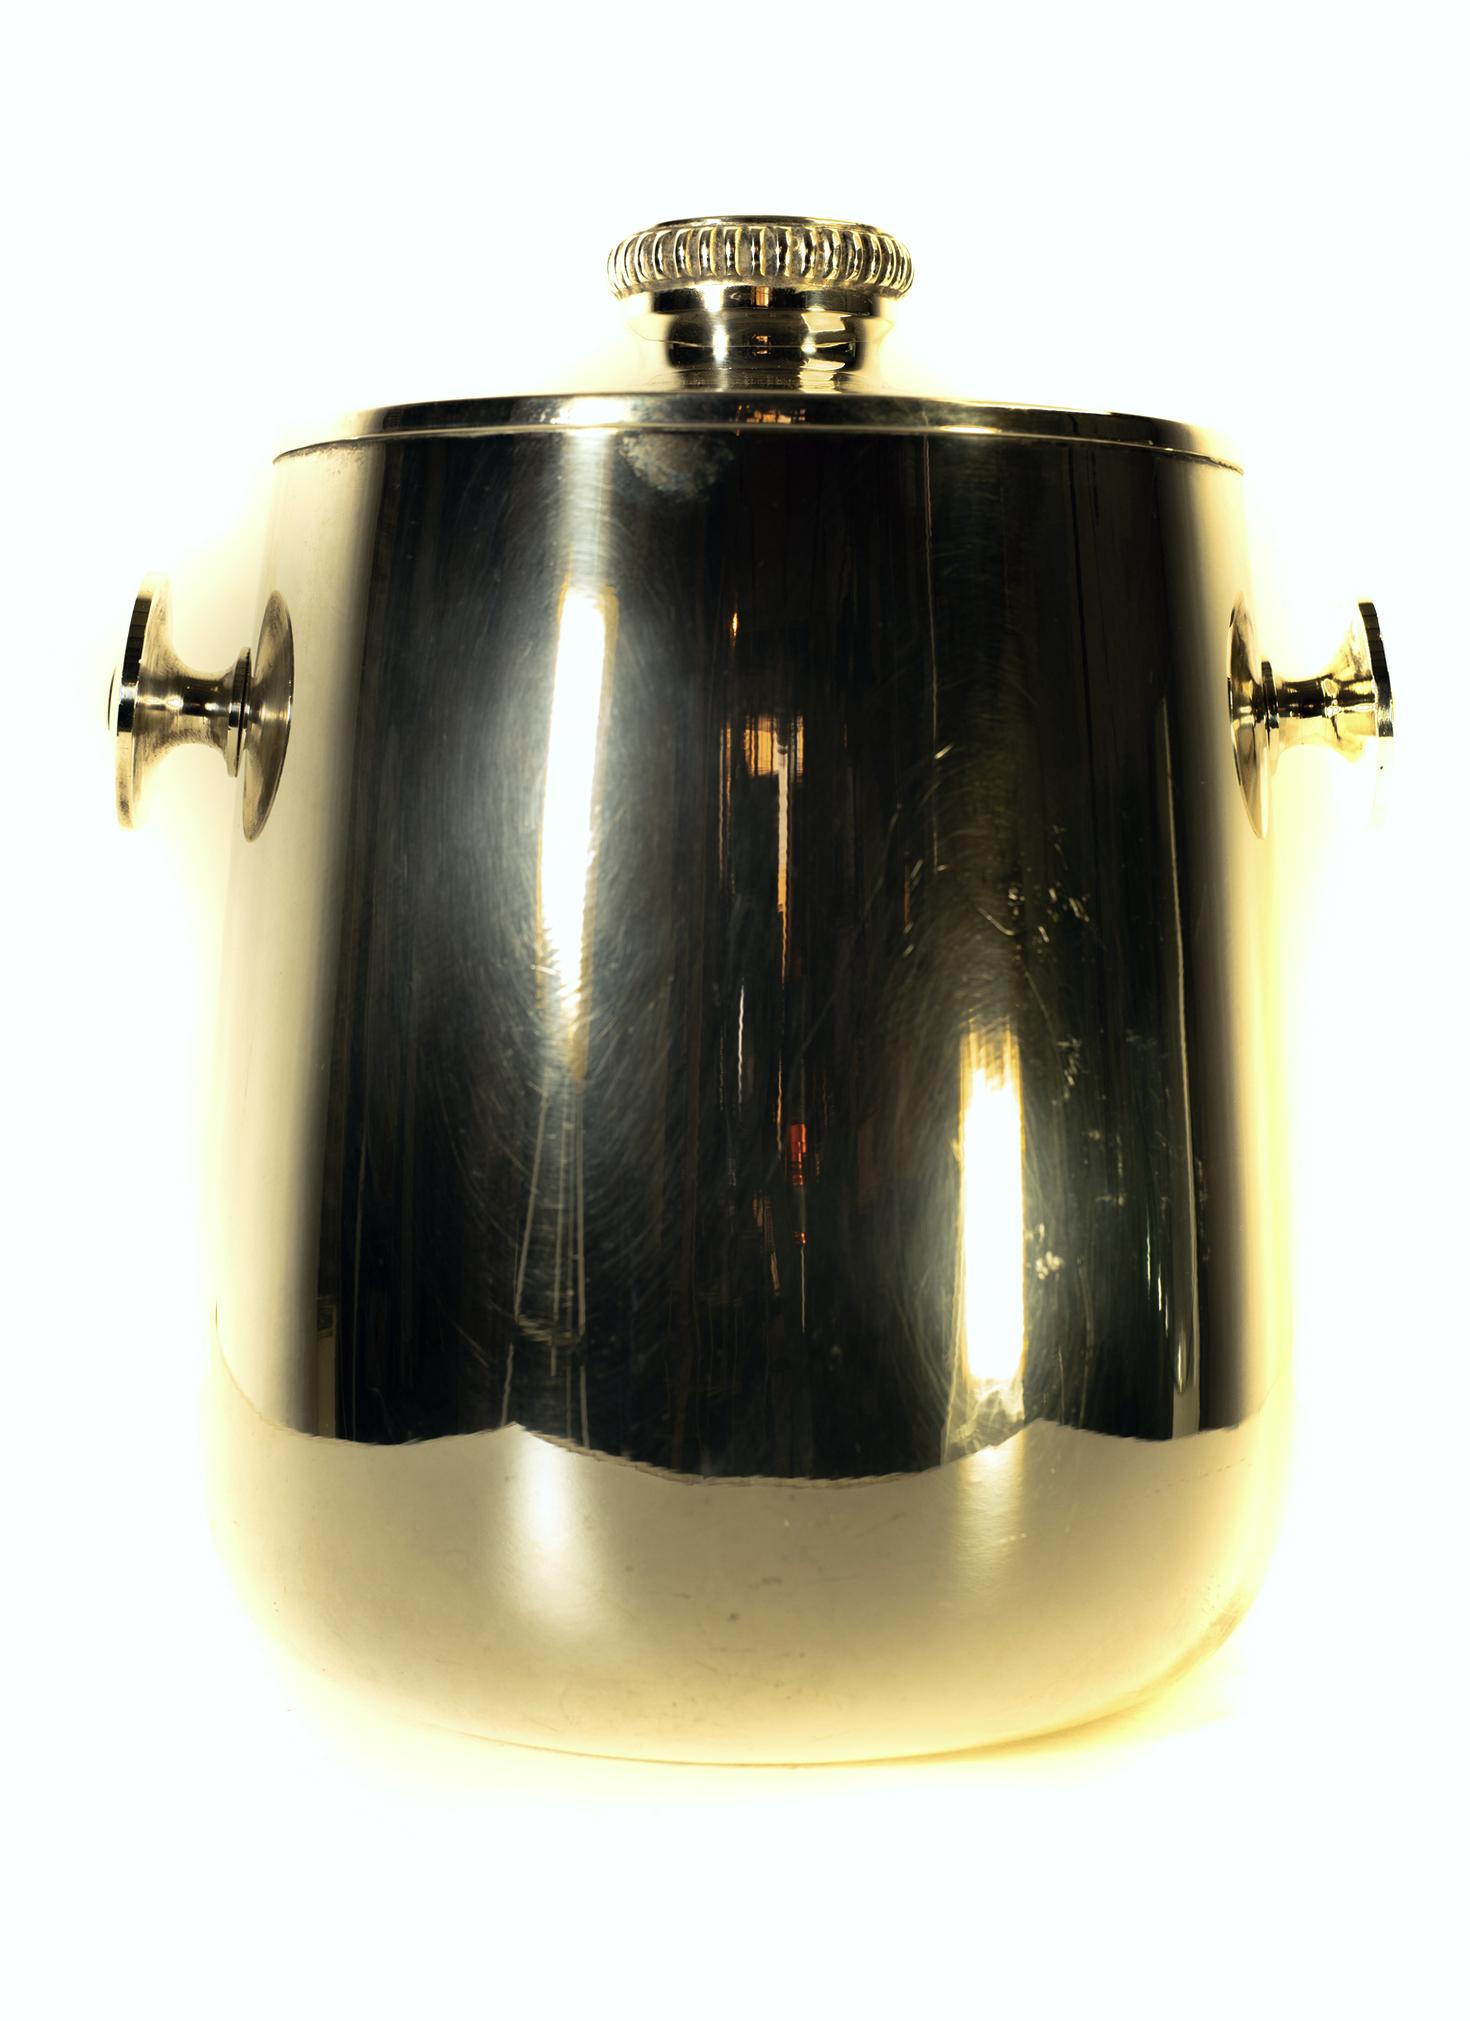 An elegant classic ice bucket with lid by Macabo Milano, Italy in silver guilt metal. Stamped in the bottom.